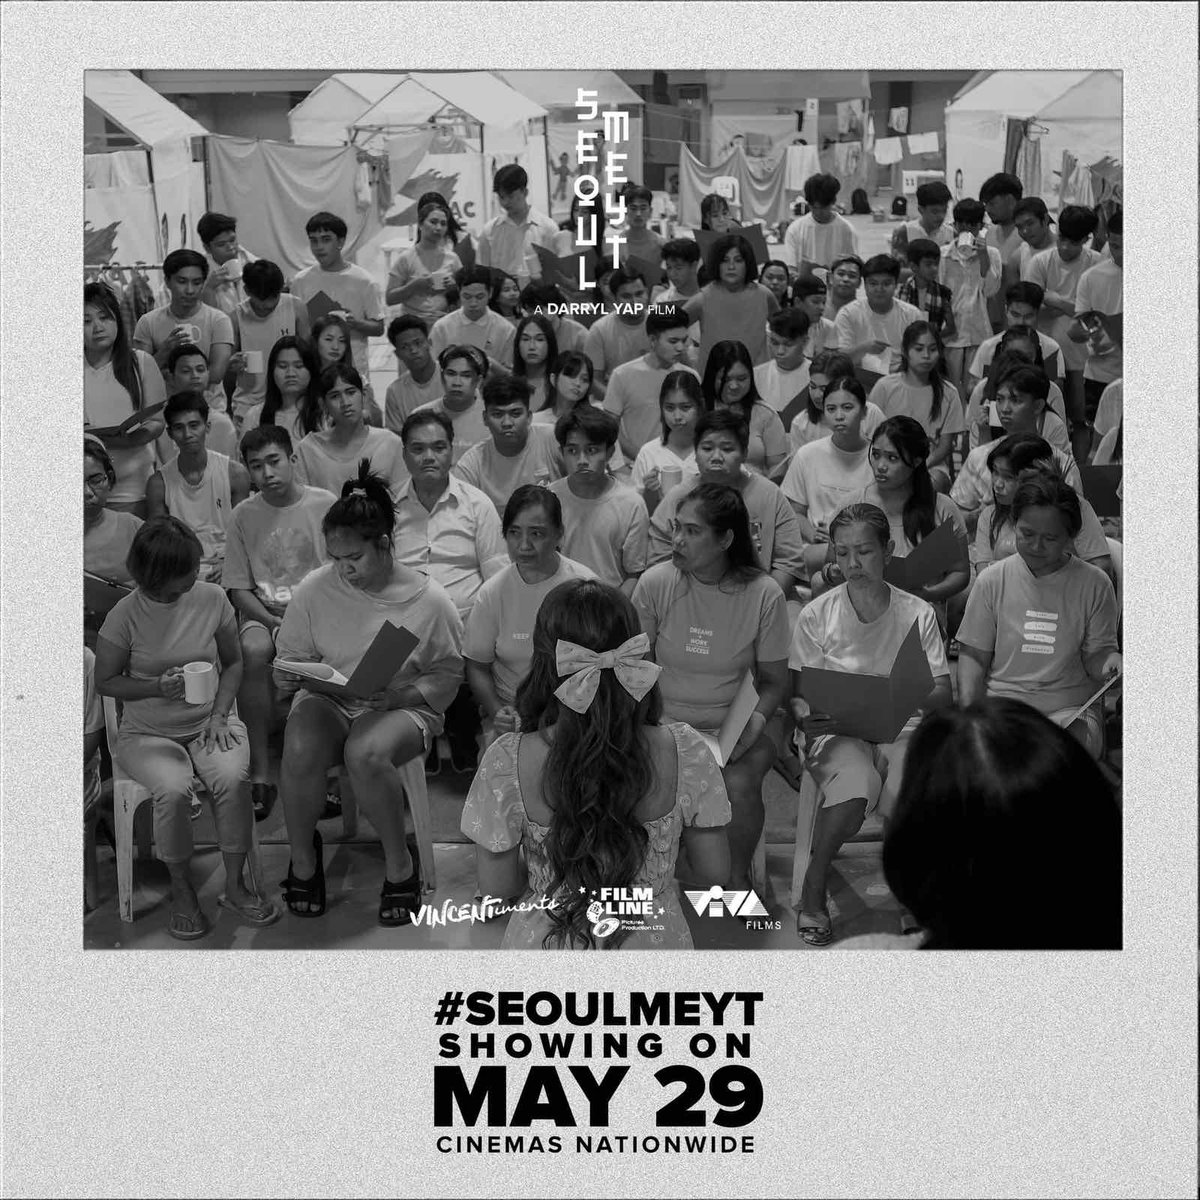 KIM MOLINA-JERALD NAPOLES with DARRYL YAP the 3rd film of the Box Office Trio! #SEOULMEYT • MAY 29